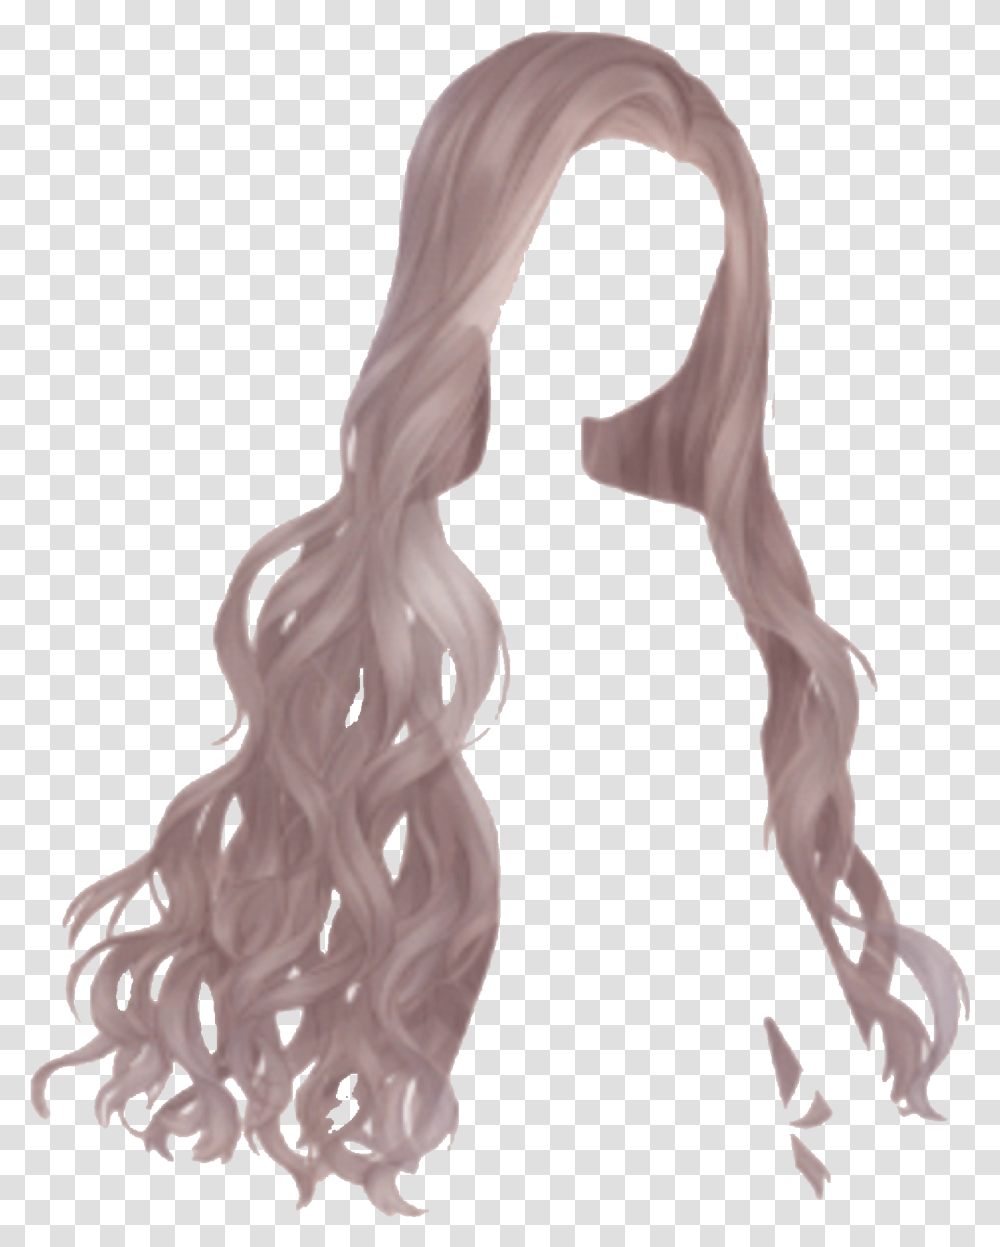 Download The Girl's Beautiful Hair Scatters Casually Hair Love Nikki Dress Up Queen, Person, Human, Art, Fire Transparent Png